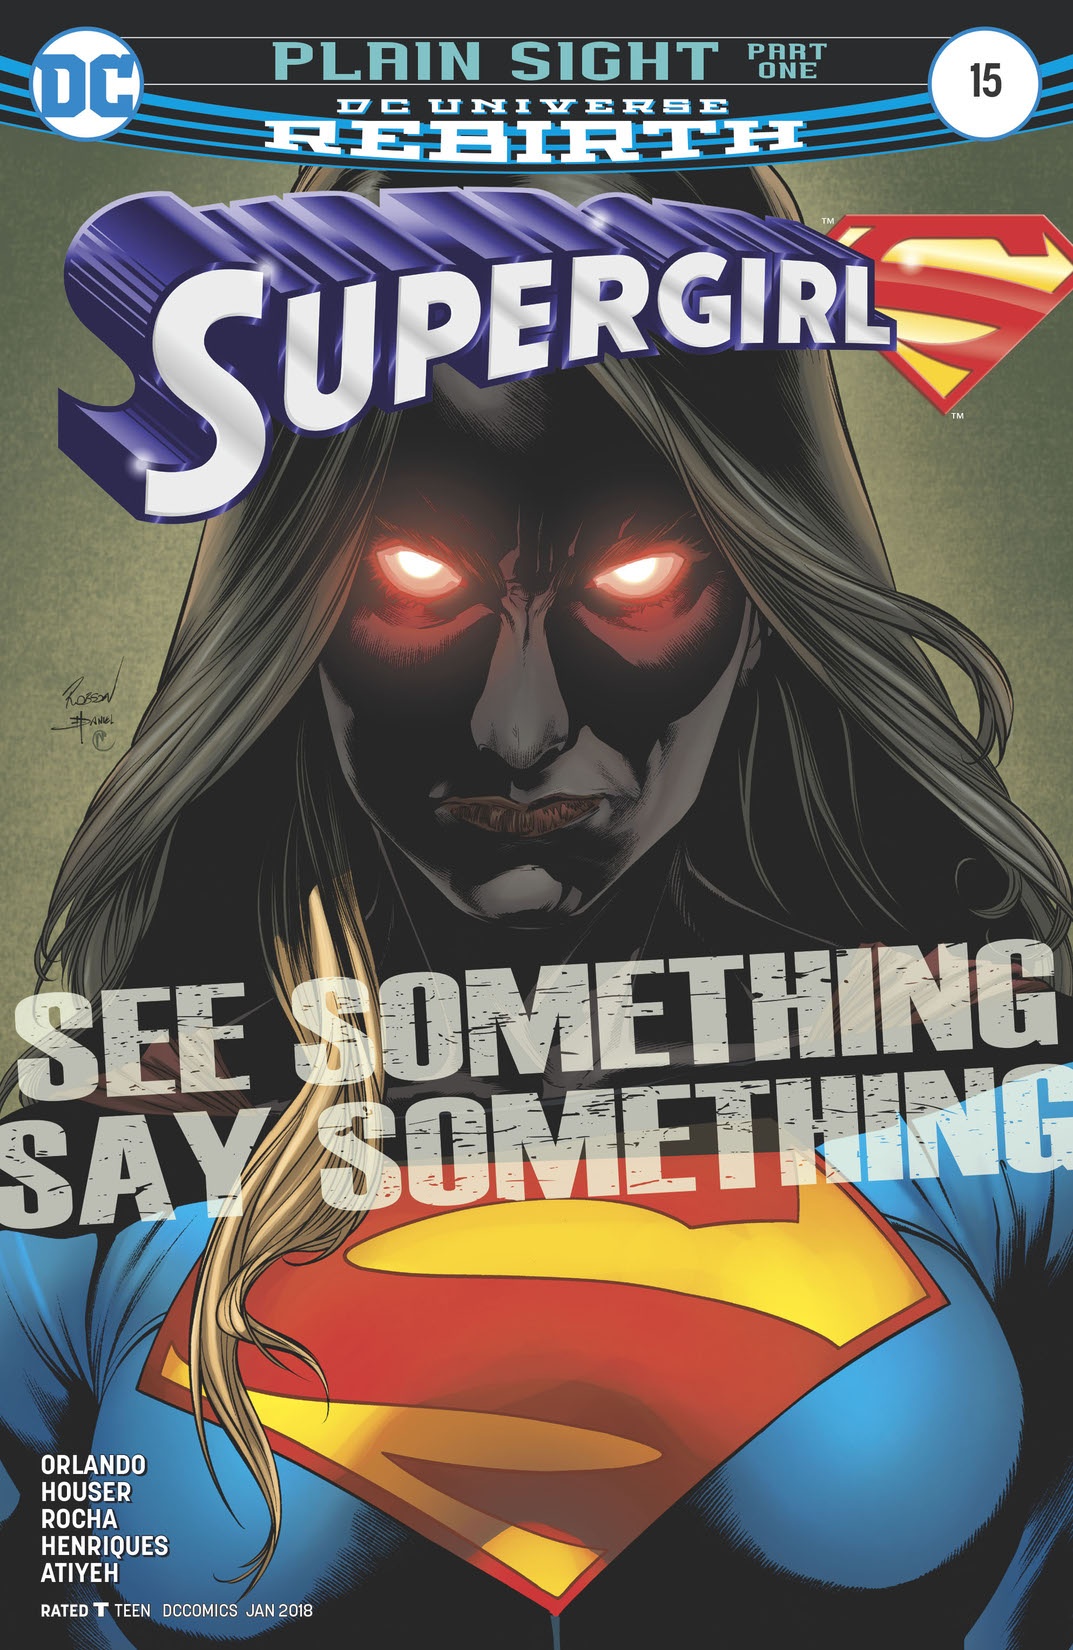 Supergirl (2016-) #15 preview images